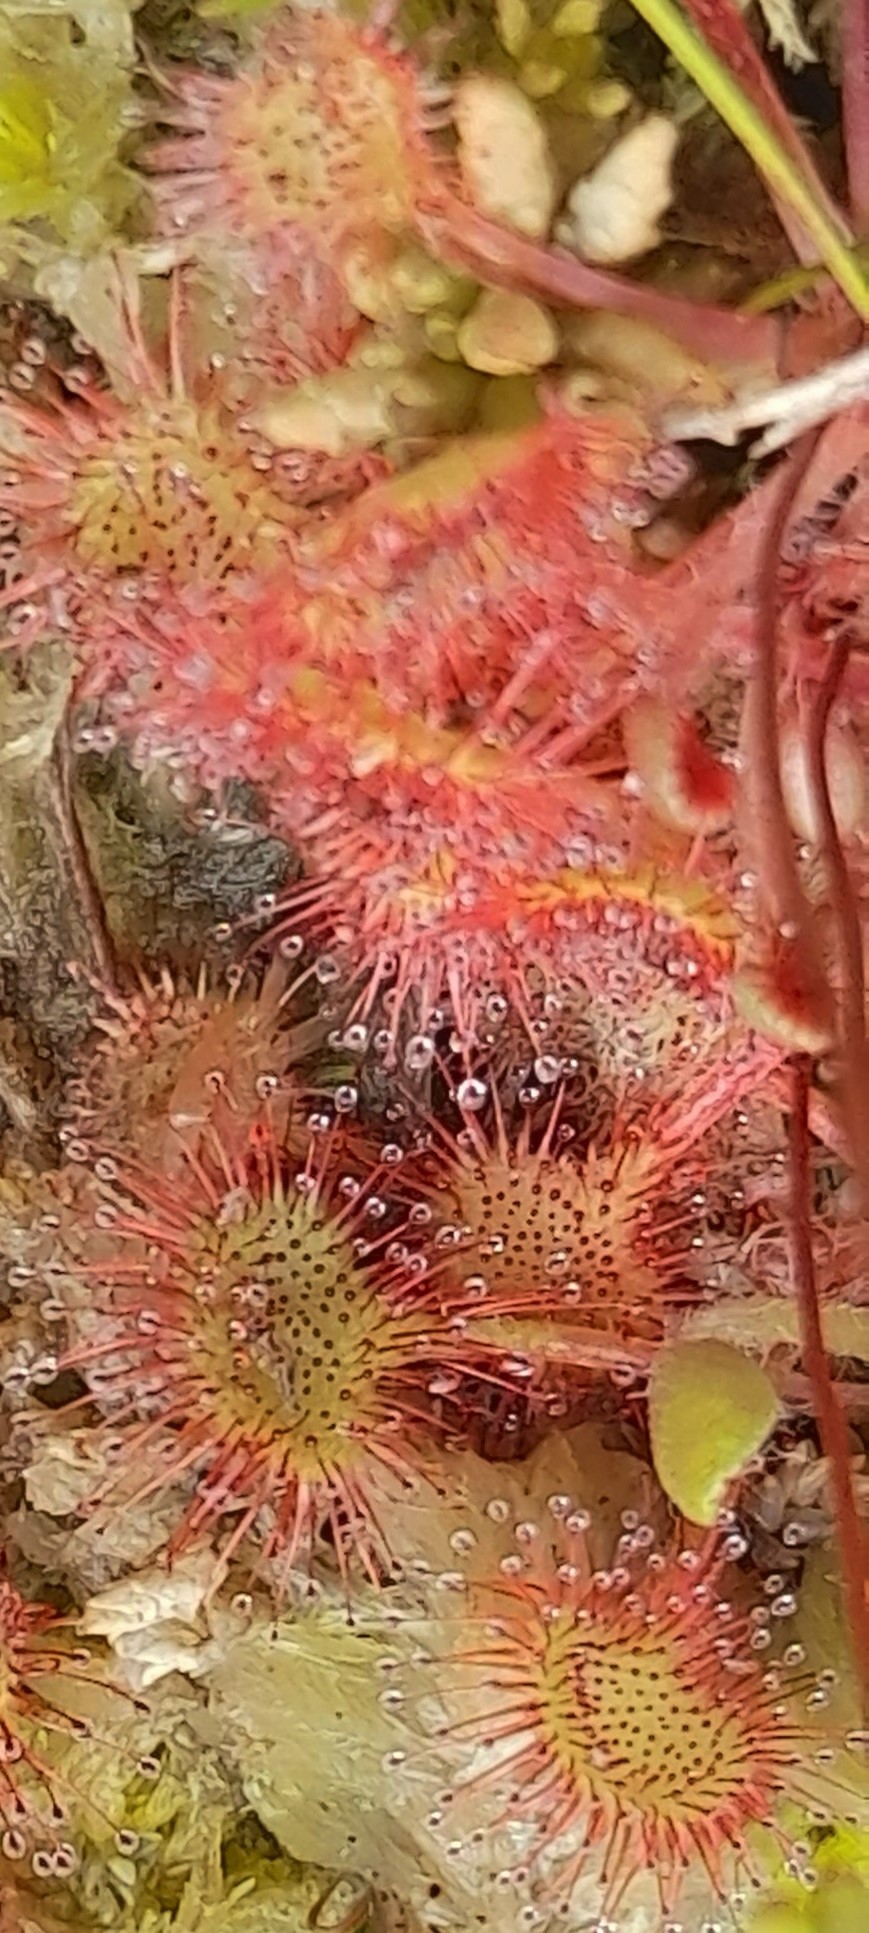 Sundew Leaves and Glands, Malham, 12th July 2022